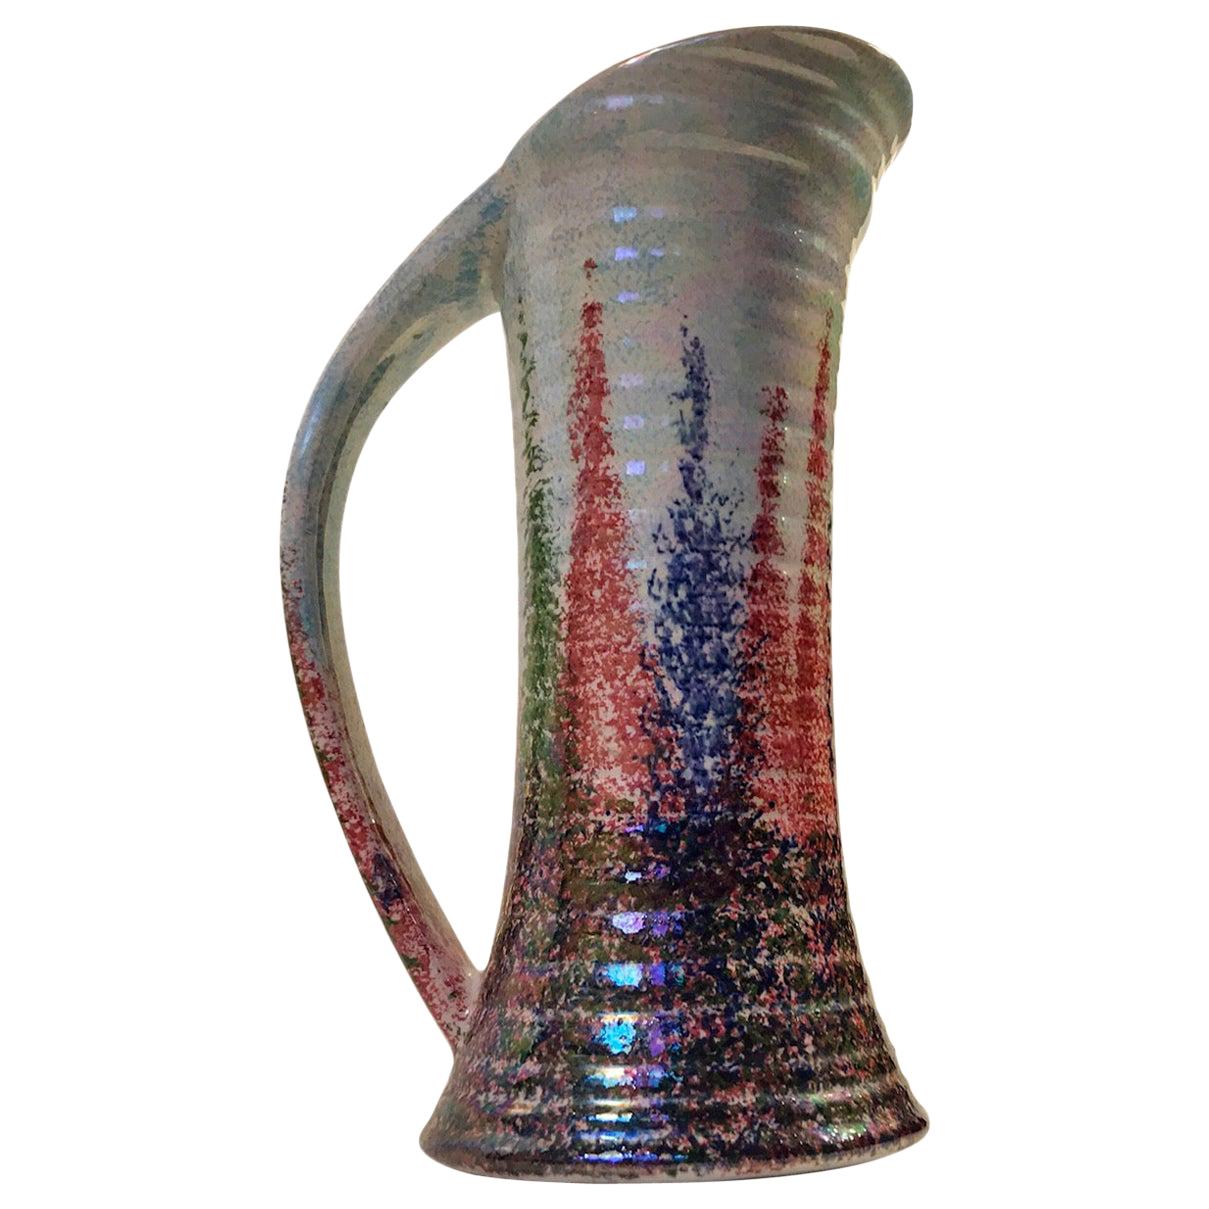 Psychedelic Pitcher from Royal Art Pottery, 1930s